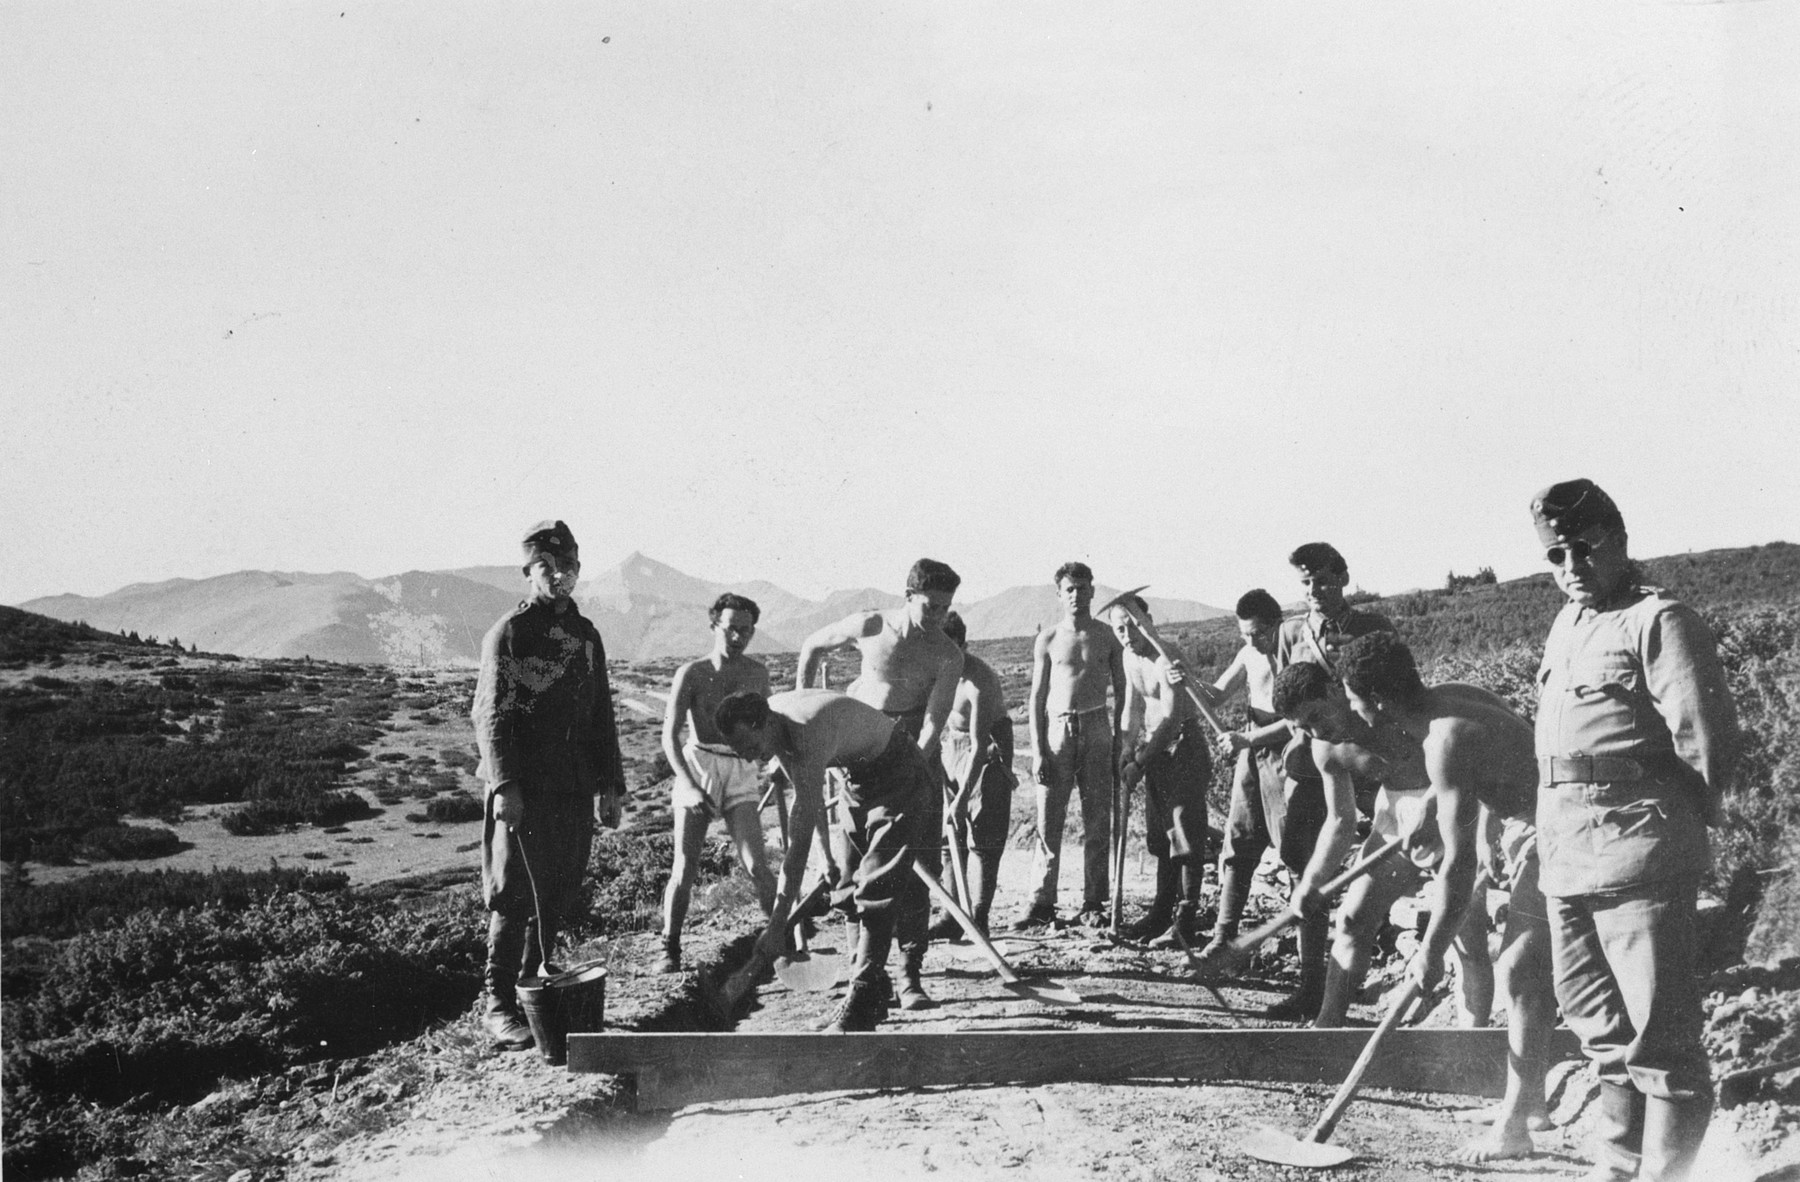 Members of a Hungarian forced labor battalion construct a road in Koszeg.